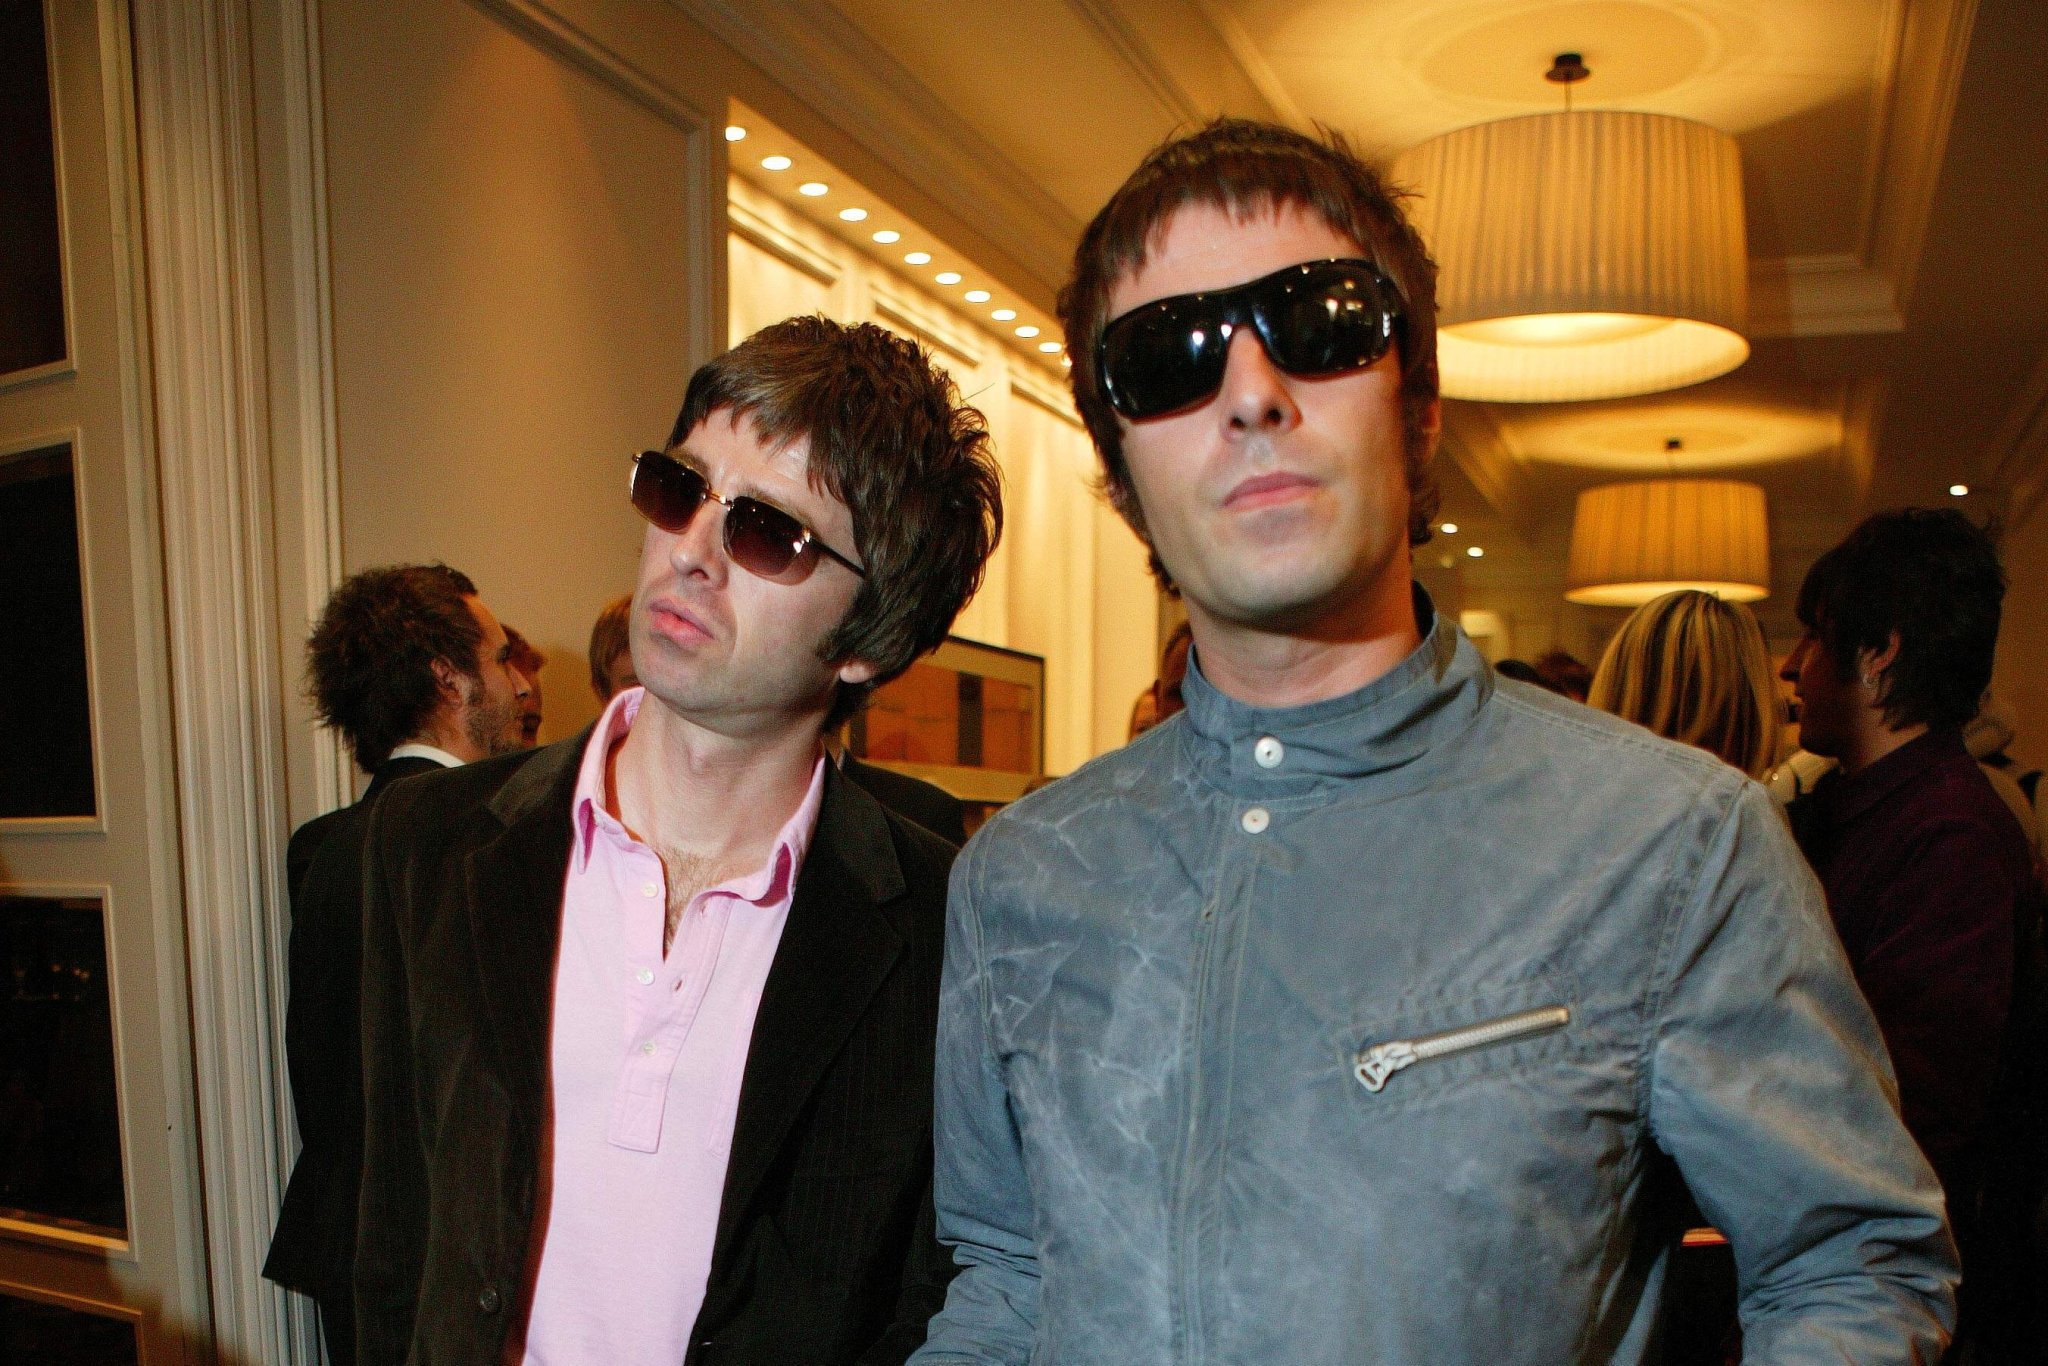 "It's Kind of Illegal for Two Brothers to Make Love": Our 2005 Feature on Oasis' Noel and Liam Gallagher